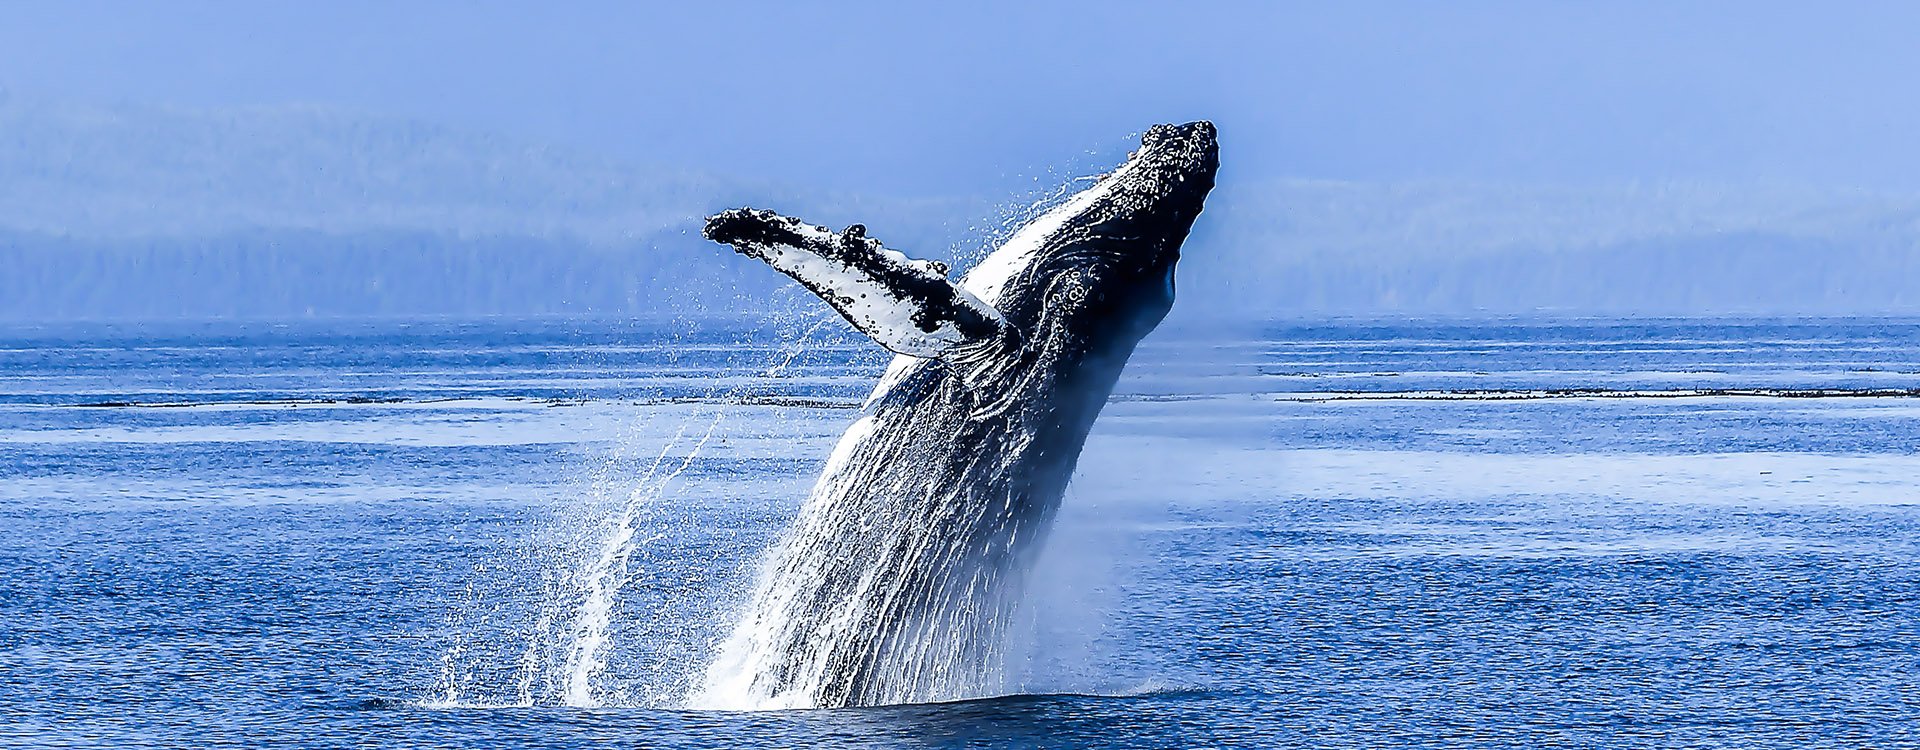 humpback whale in the blue ocean